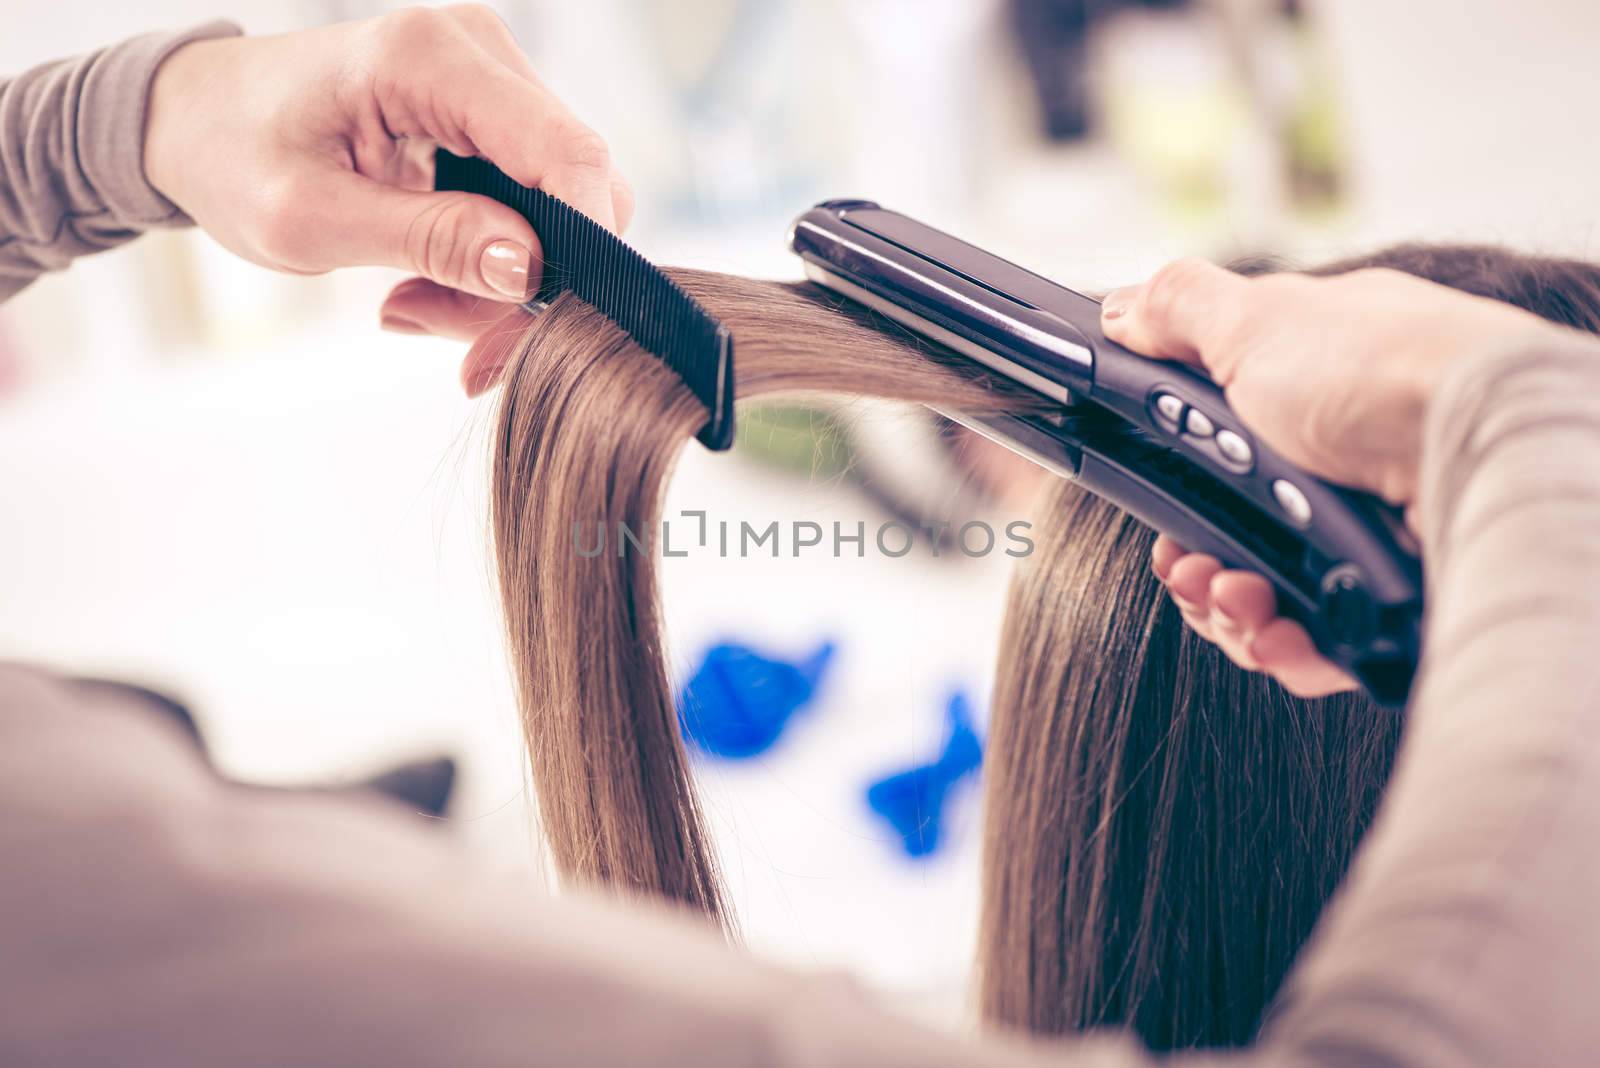 Hair Straighteners by MilanMarkovic78